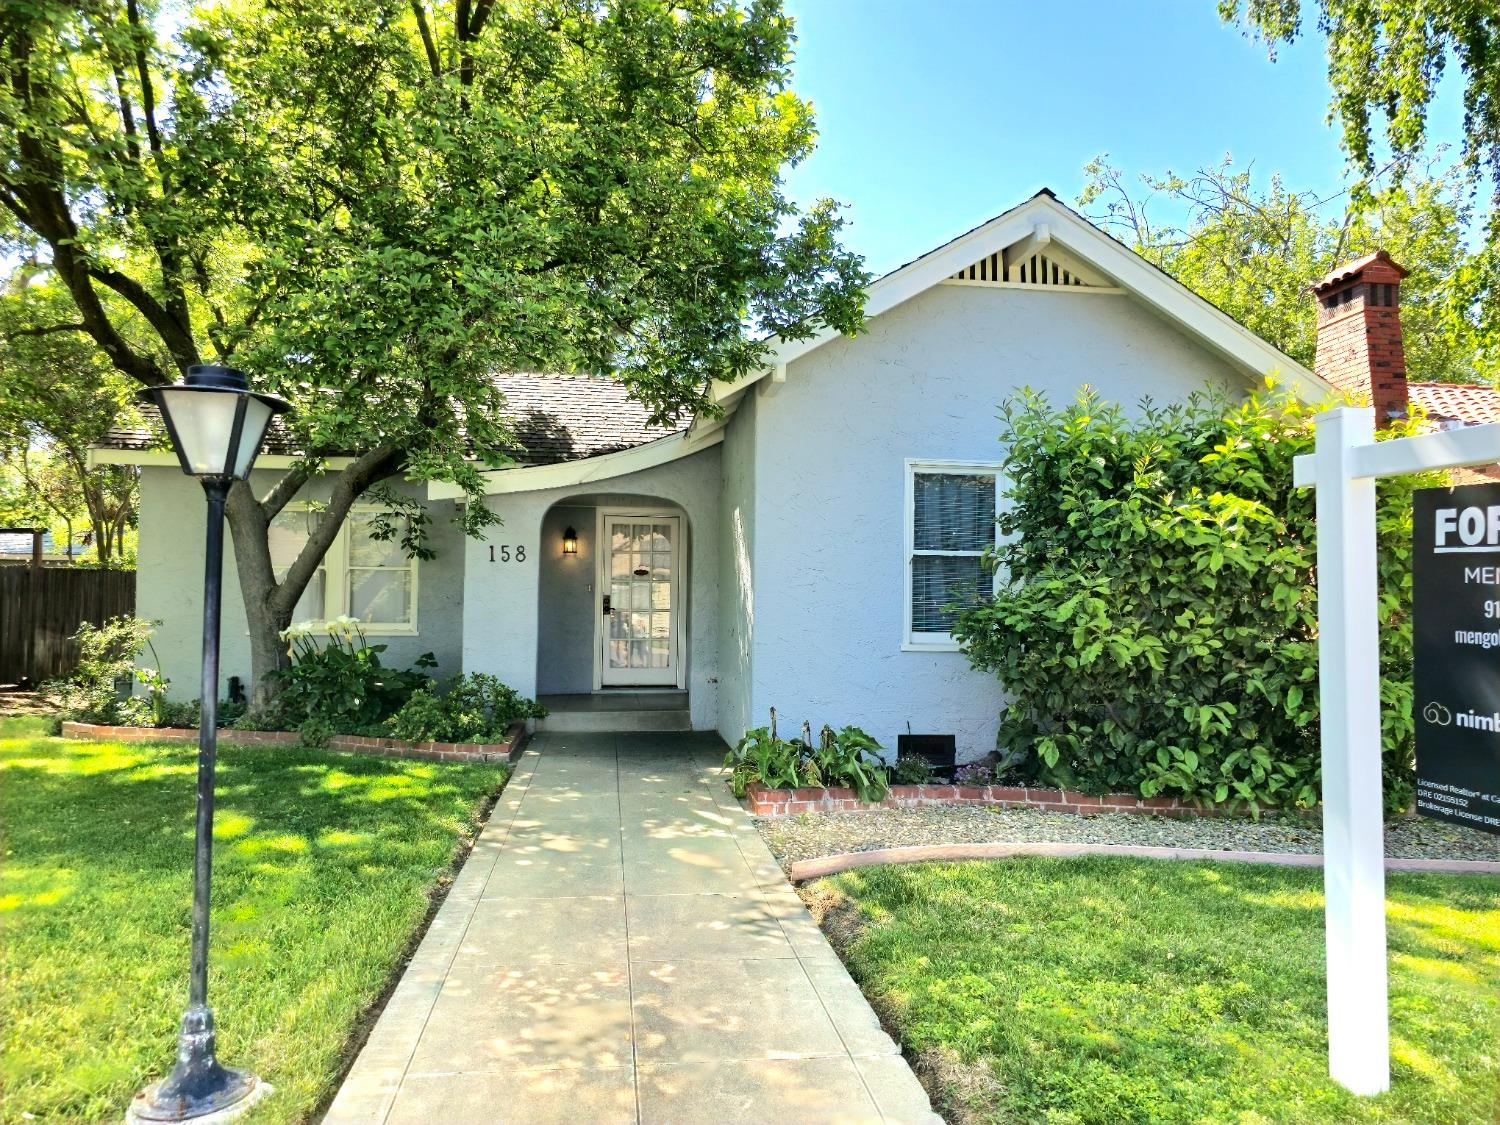 Photo of 158 Cleveland St in Woodland, CA